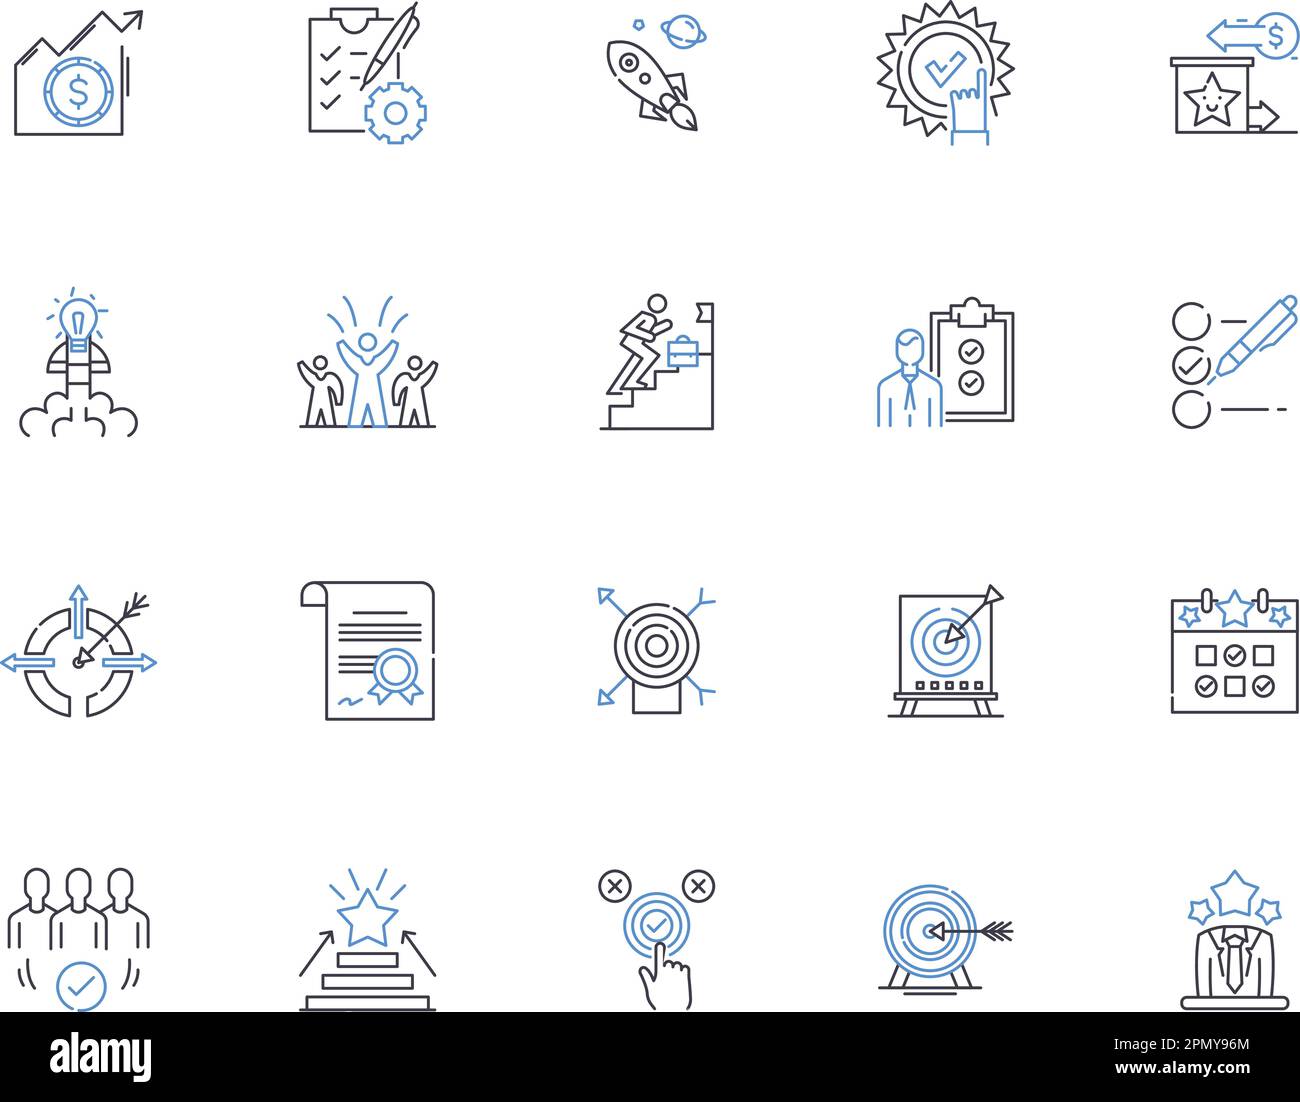 Goals outline icons collection. Aims, Objectives, Targets, Ambitions, Aspirations, Hopes, Intents vector and illustration concept set. Outcomes Stock Vector